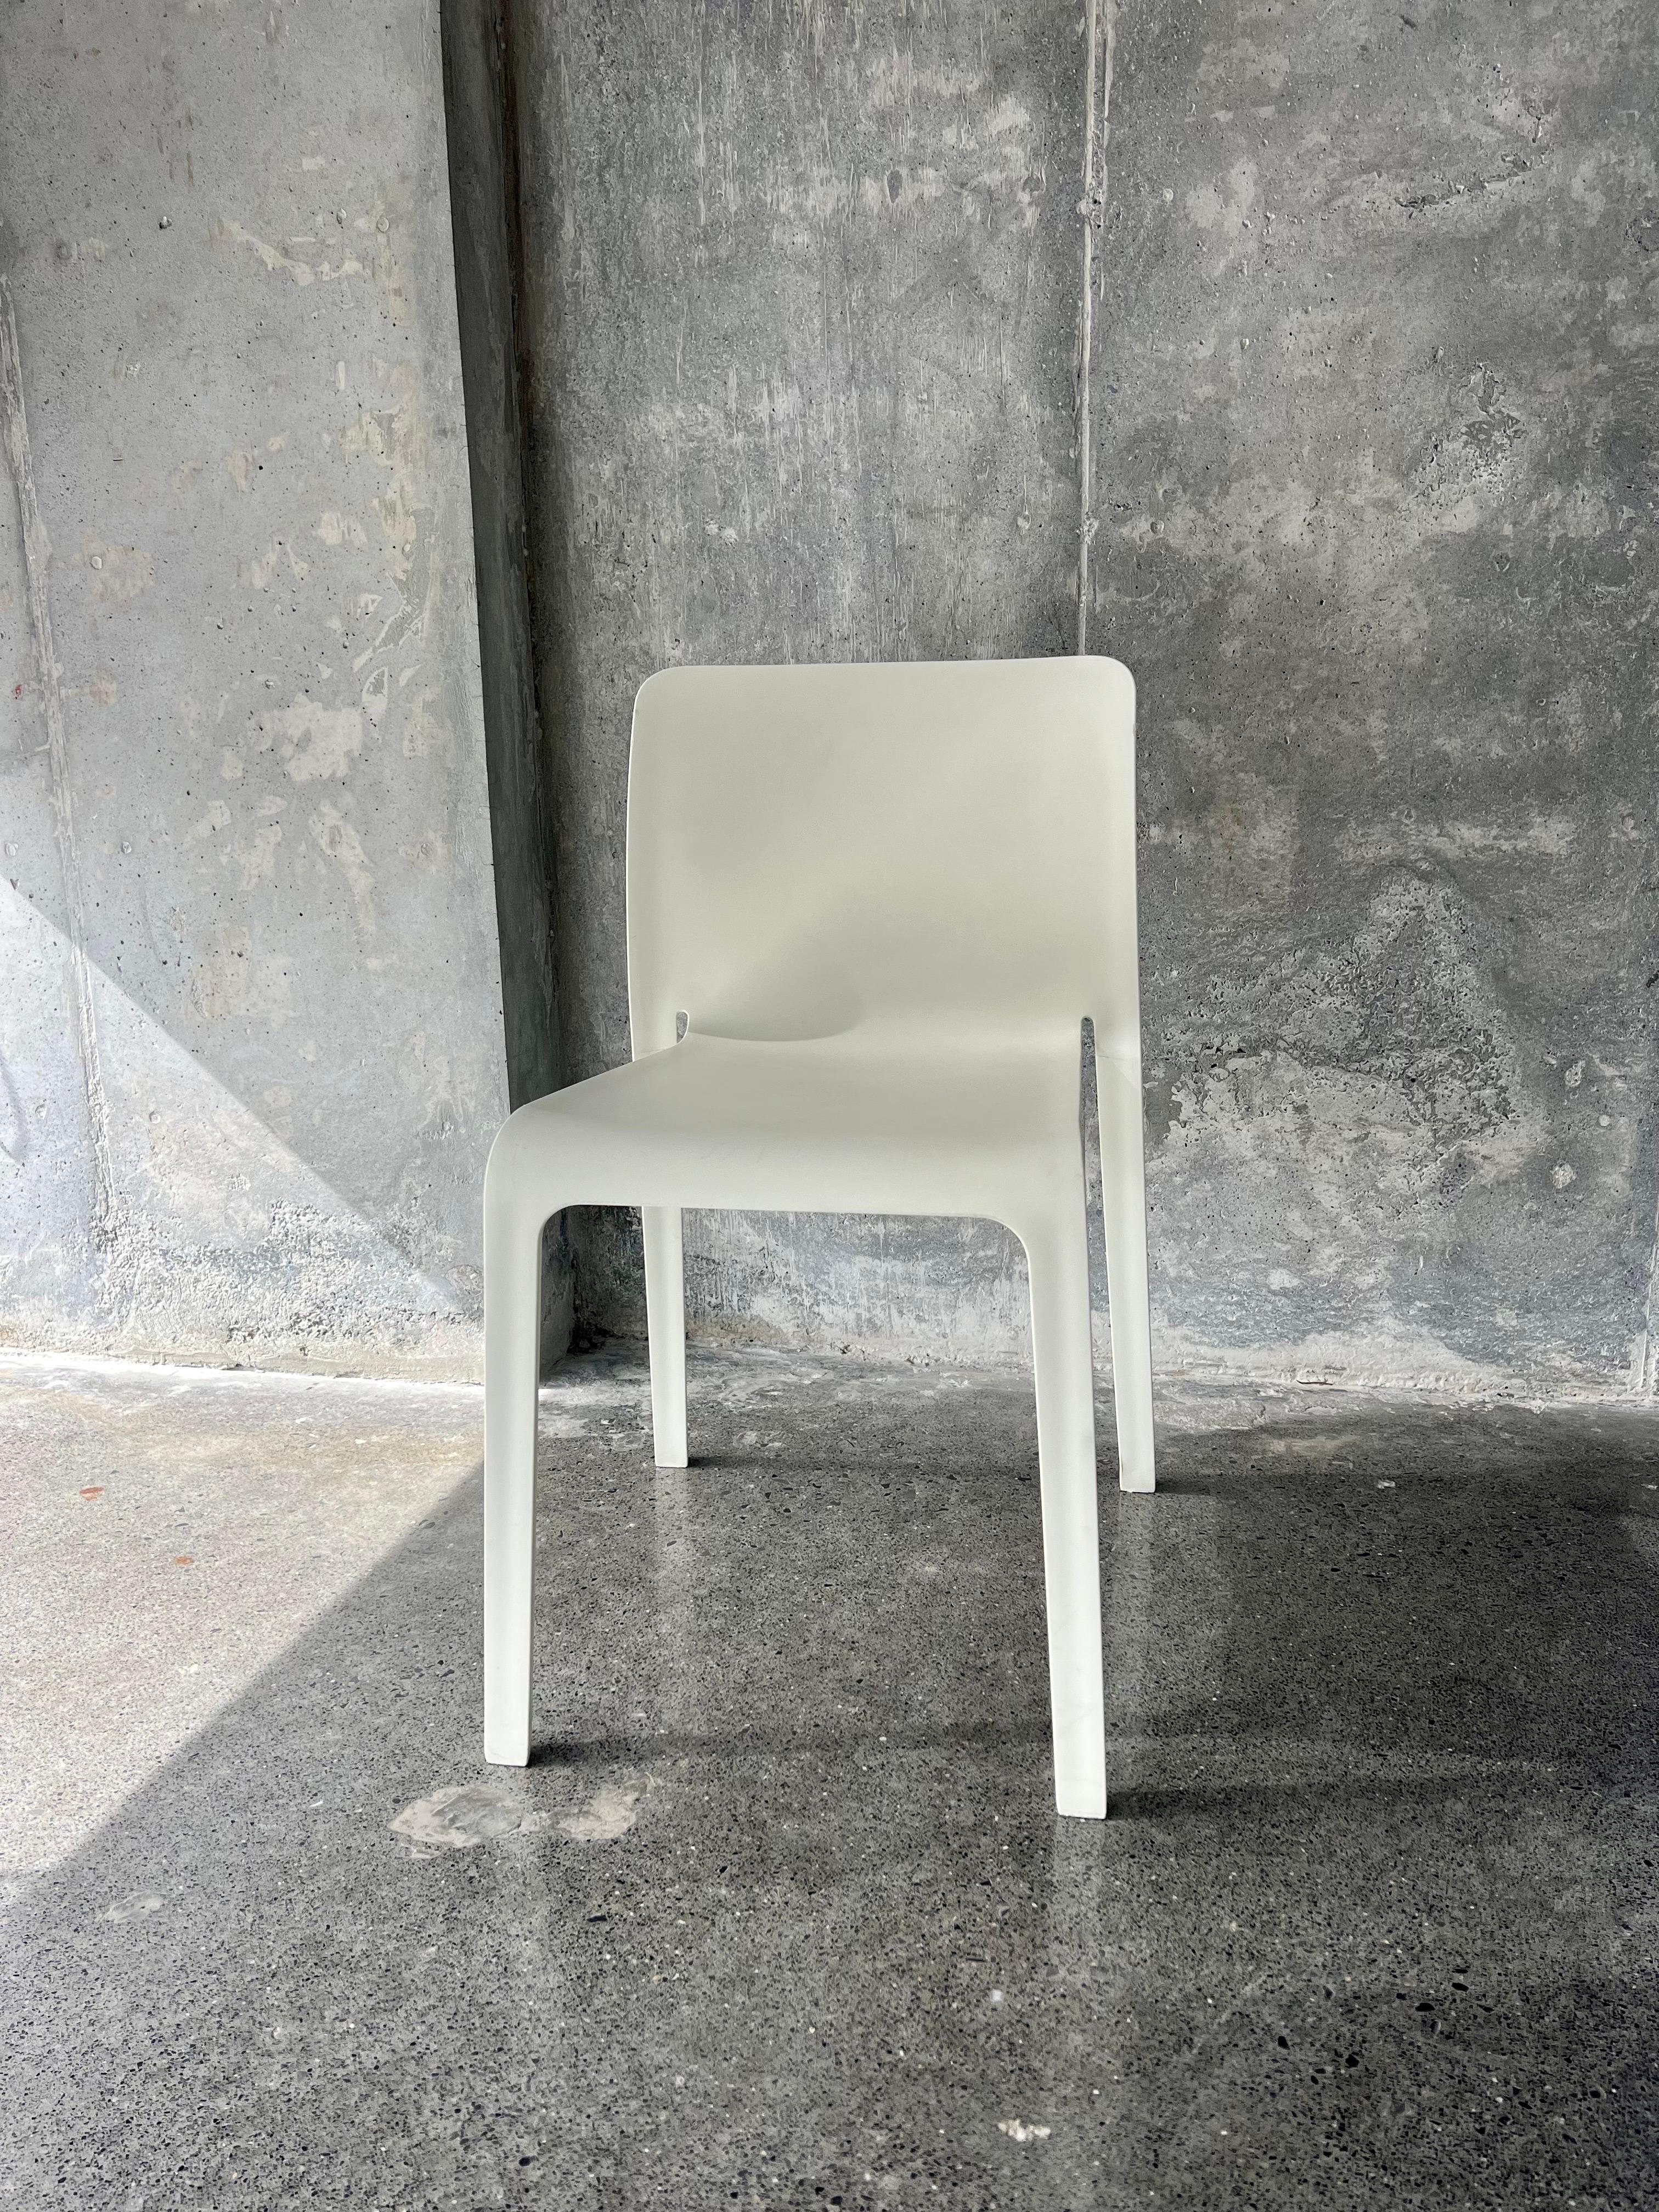 For your consideration, set of 7 First model chairs by the Italian designer Stefano Giovannoni for Magis, these chairs belonged to the assets of the international LEGO from the operating plant in Mexico, they are from the year 2018 and all seven are